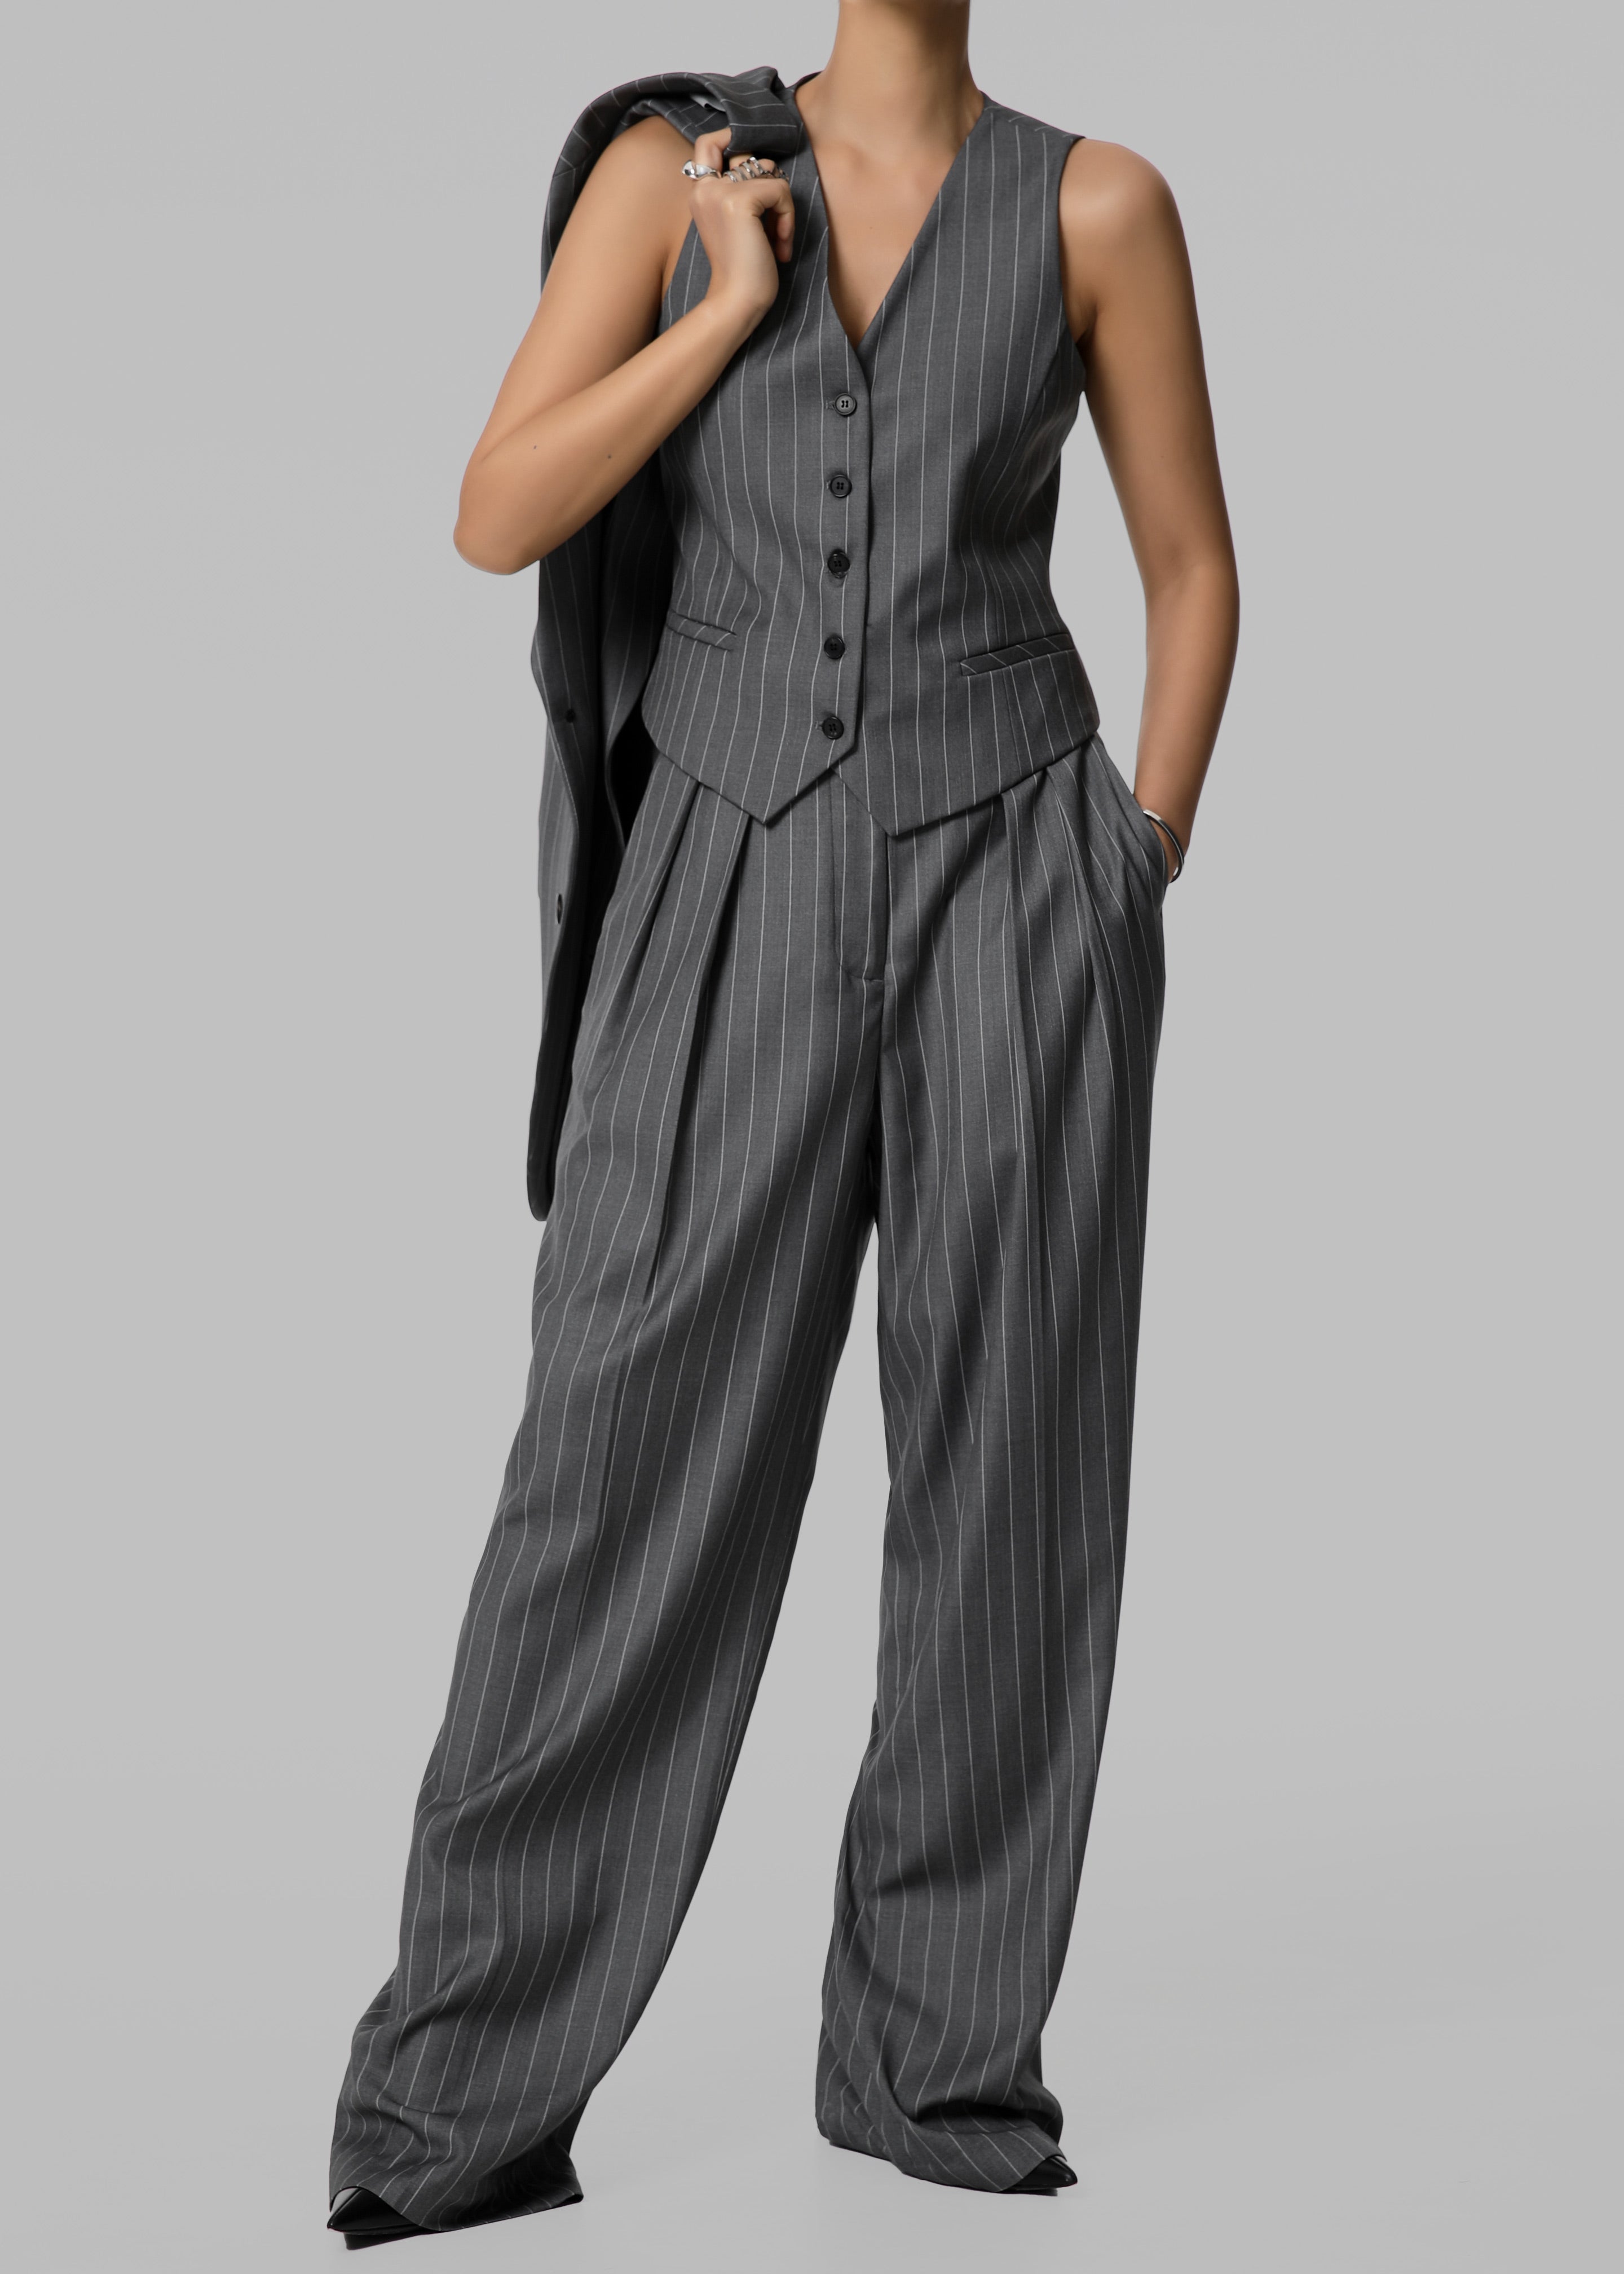 Holland Pleated Trousers - Charcoal/White Pinstripe - 2